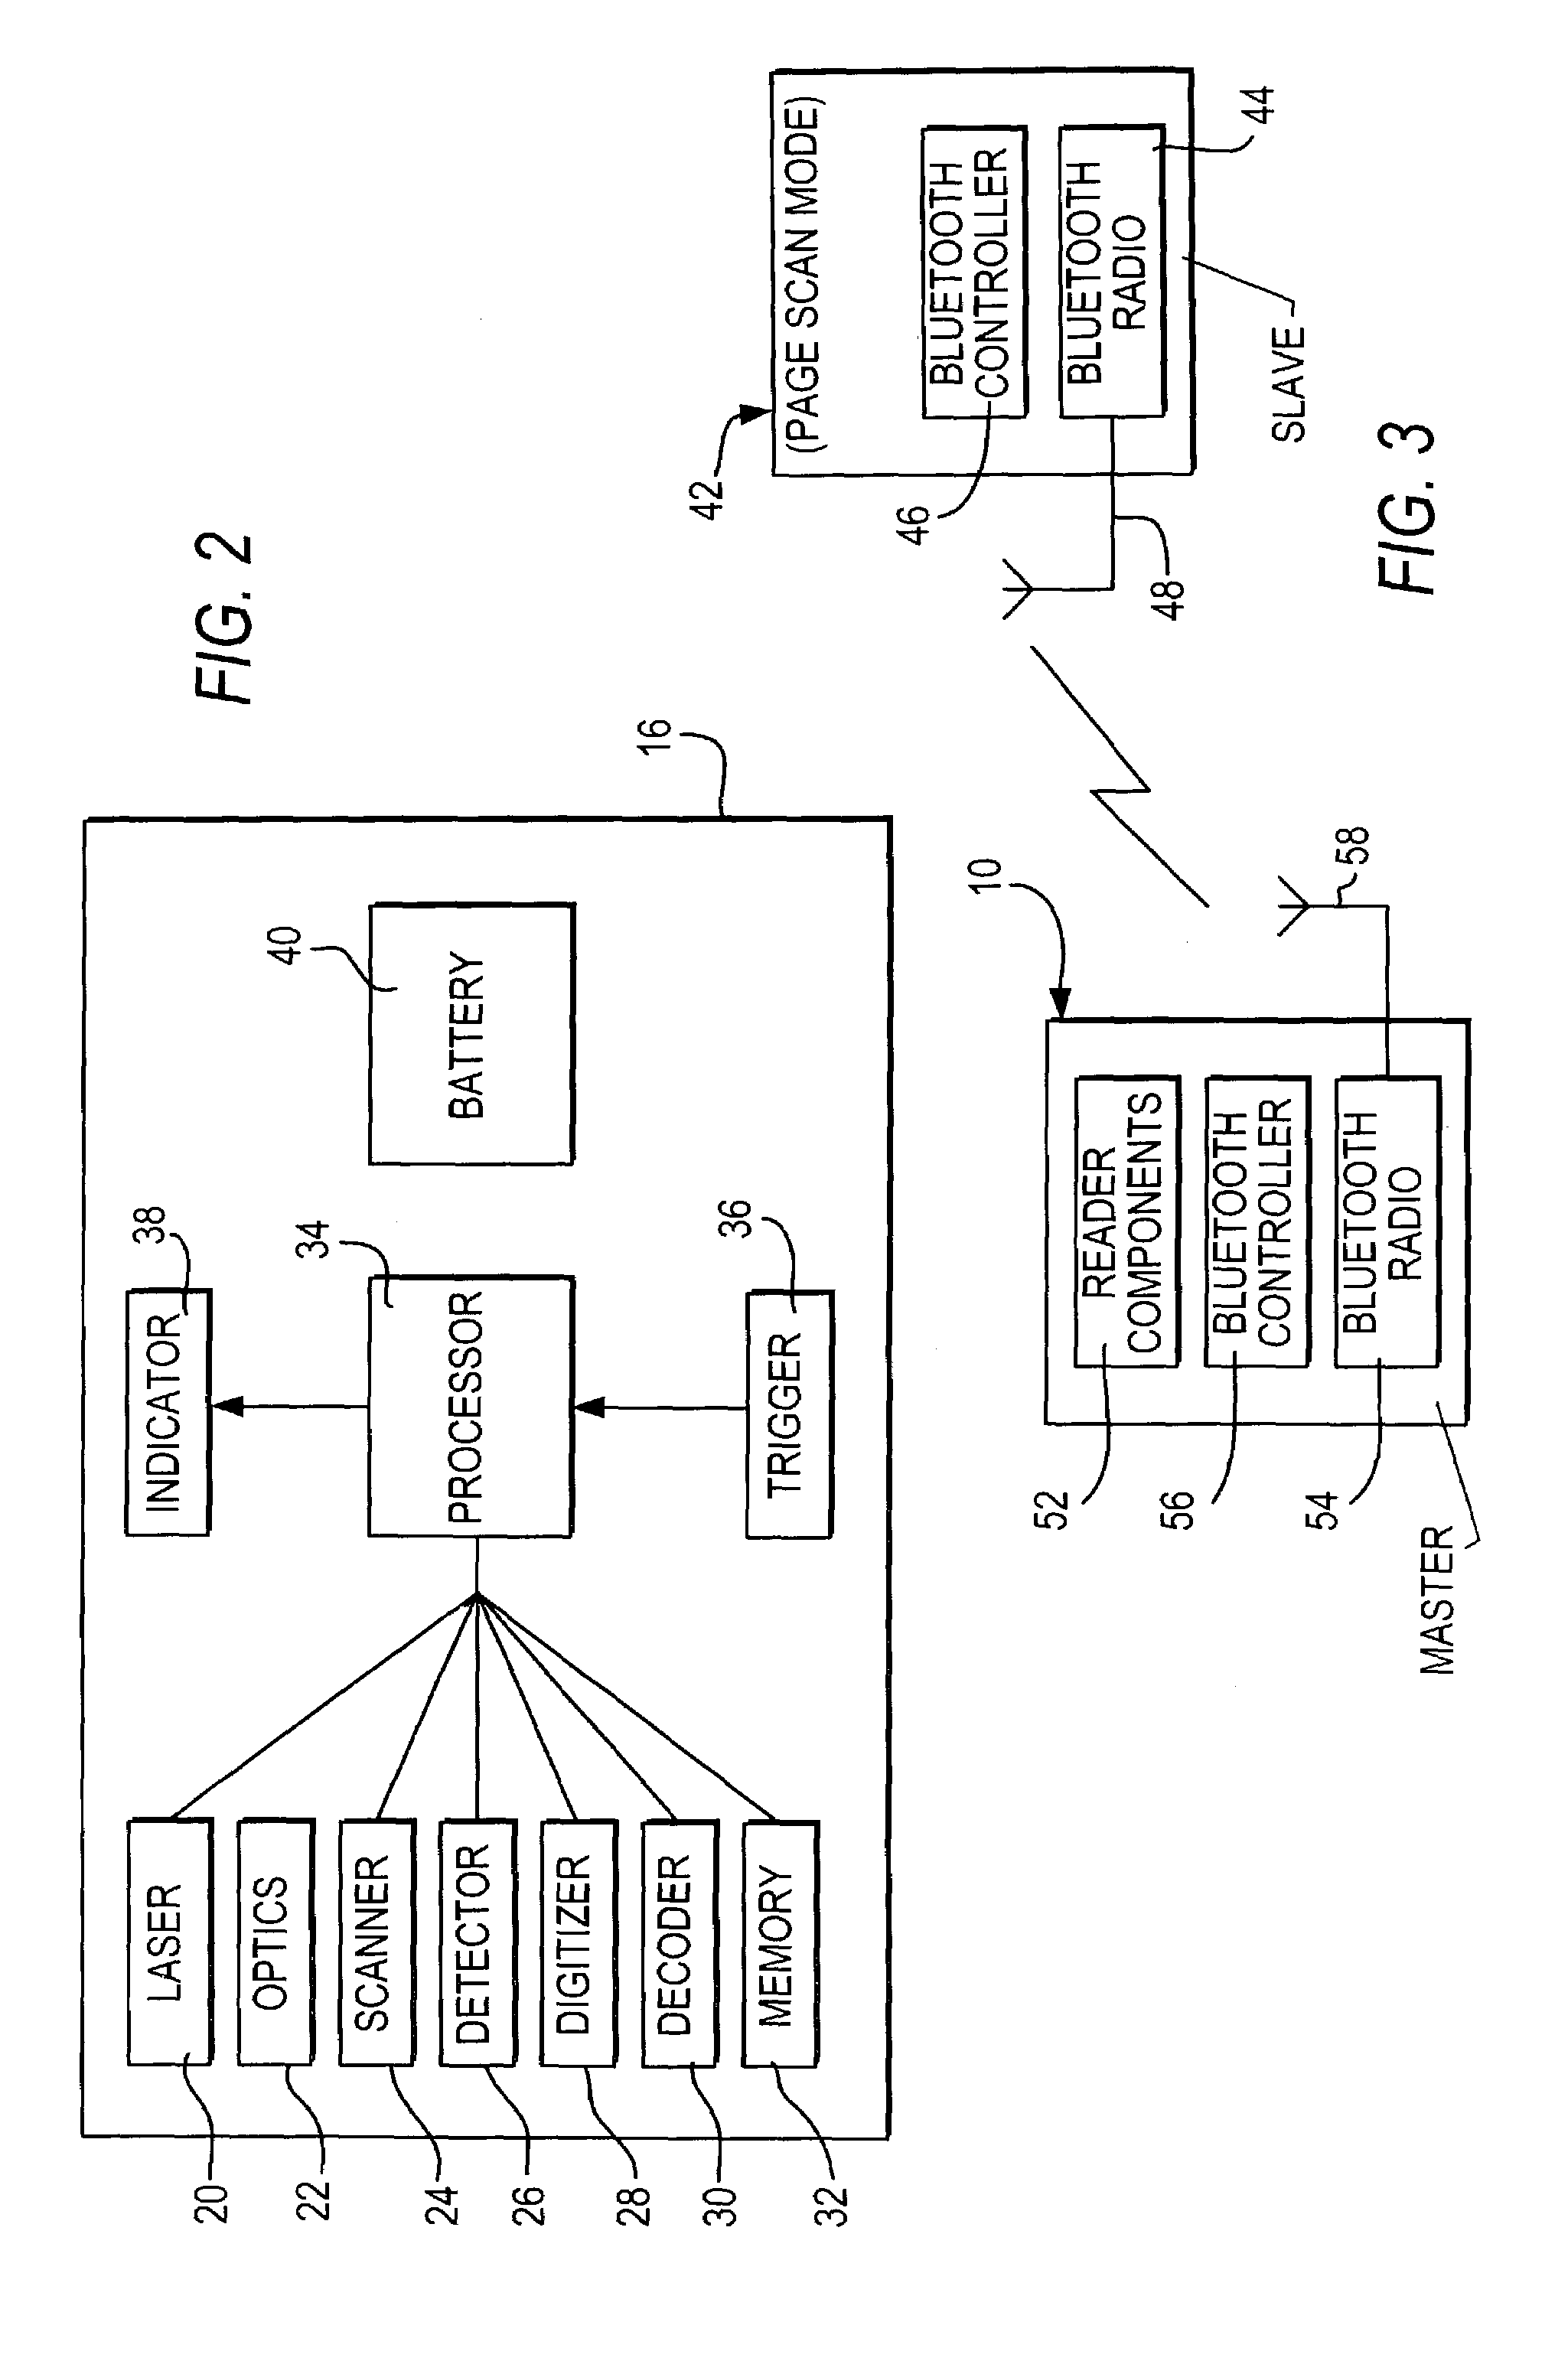 Method of and arrangement for minimizing power consumption and data latency of an electro-optical reader in a wireless network